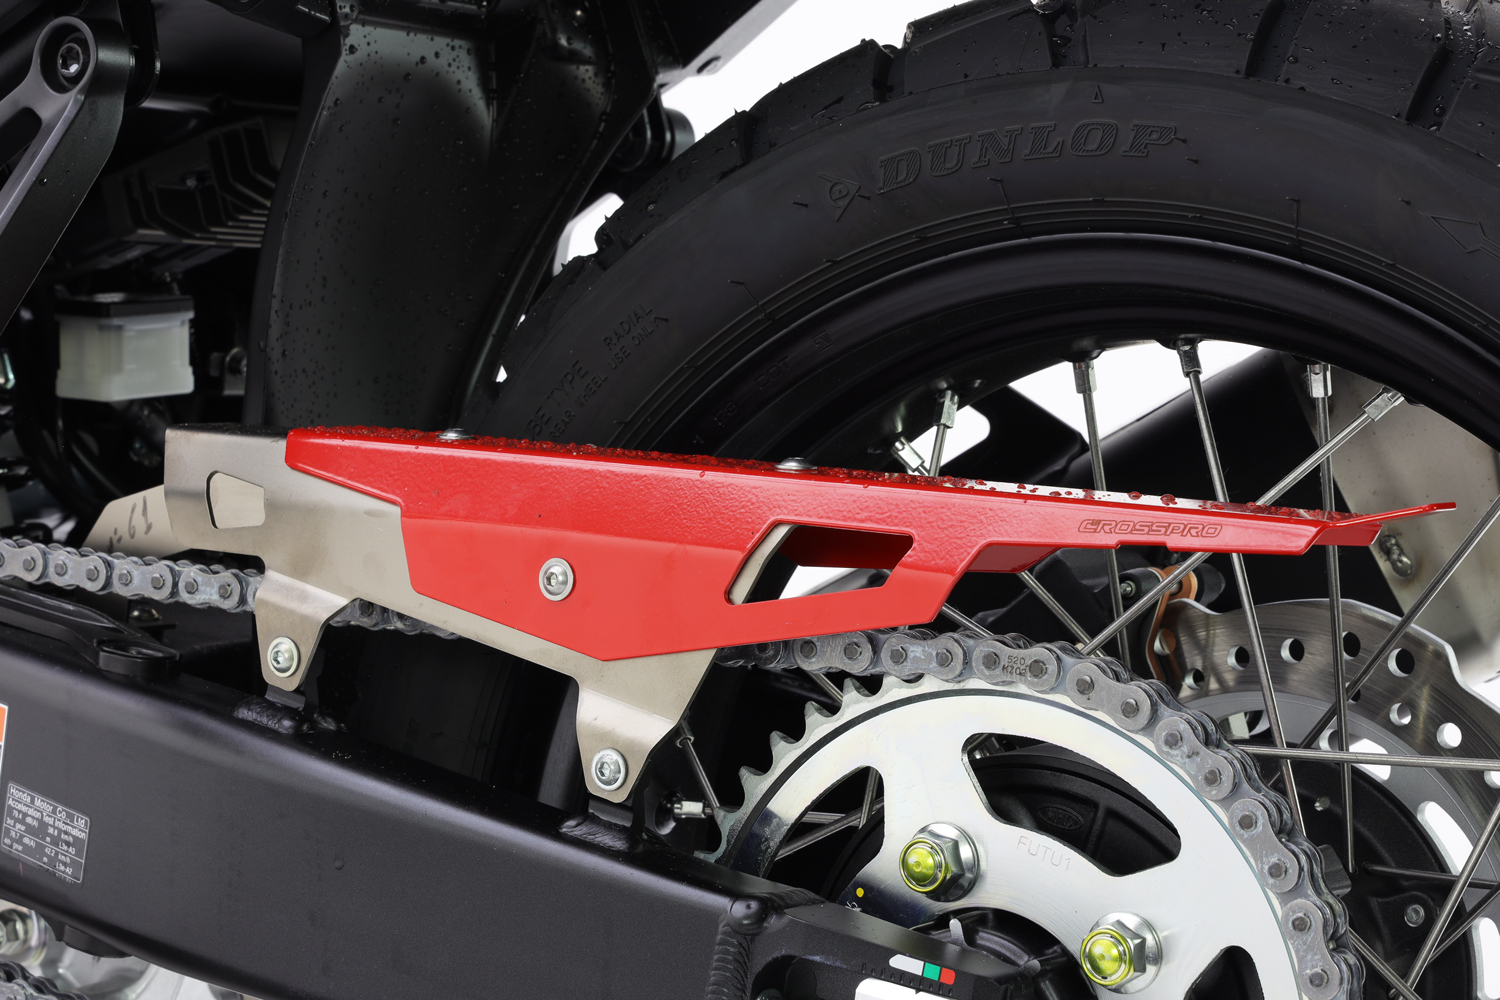 2CP21400610714_1.JPG - Chain Guard Brushed stainless steel / Red